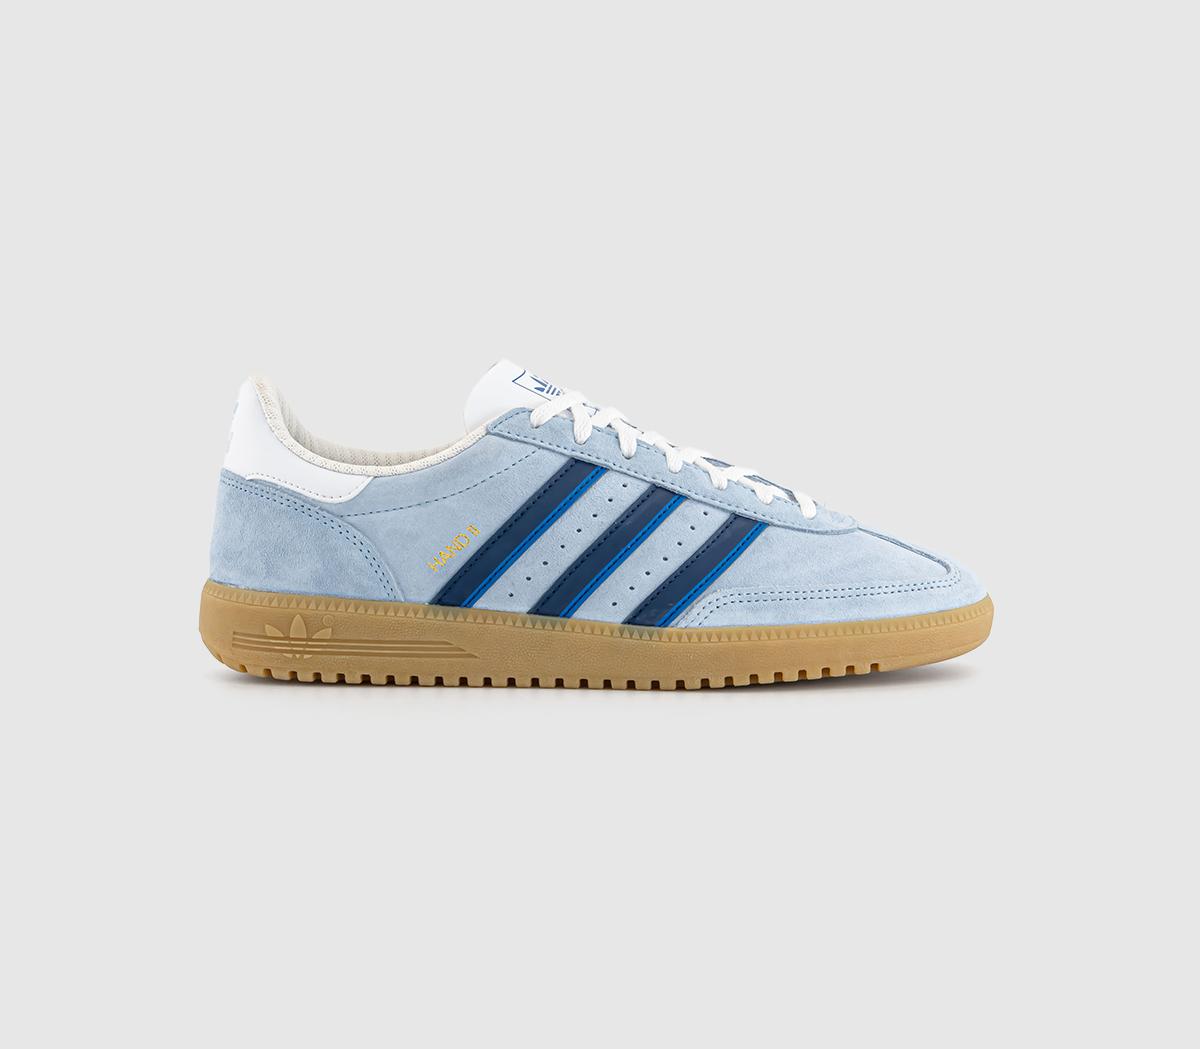 Adidas Hand 2 Trainers Clear Sky Dark Blue Core White, 8